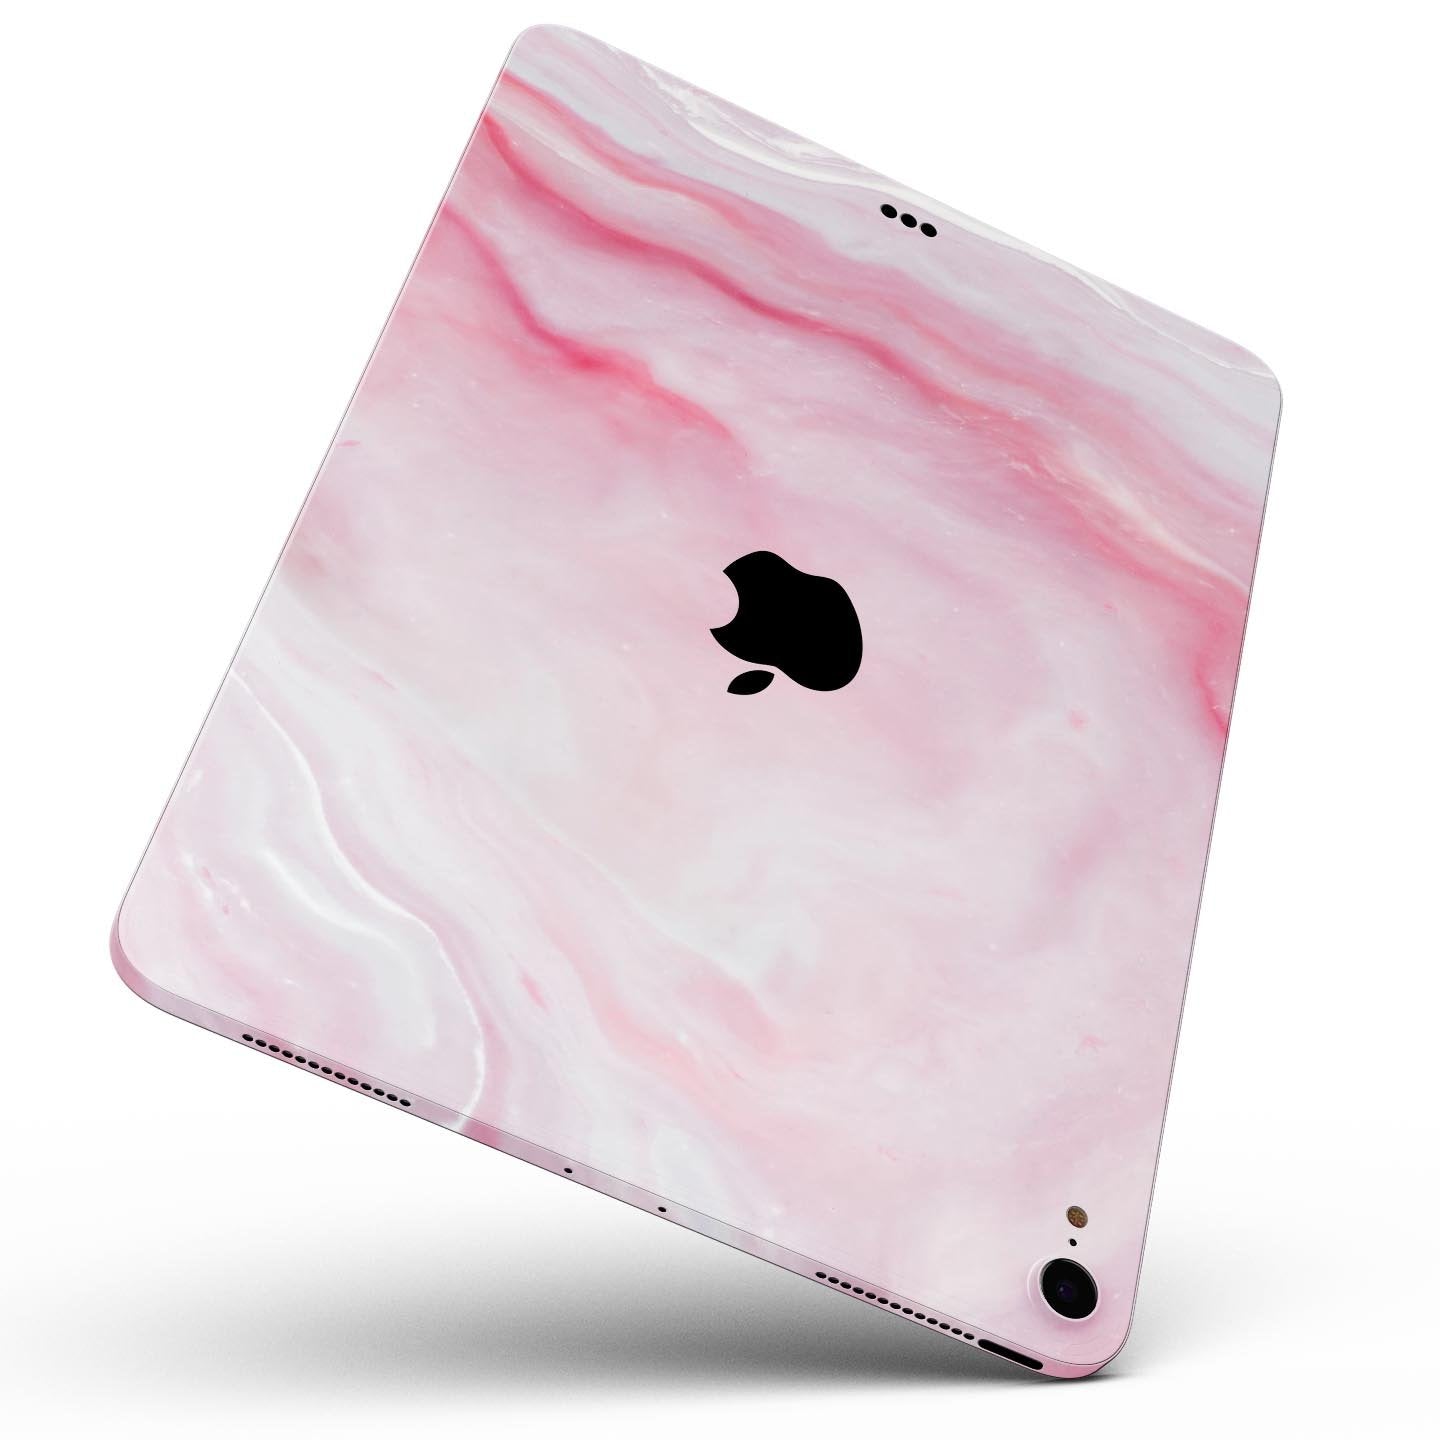 Marbleized Pink Paradise V4 - Full Body Skin Decal for the Apple iPad